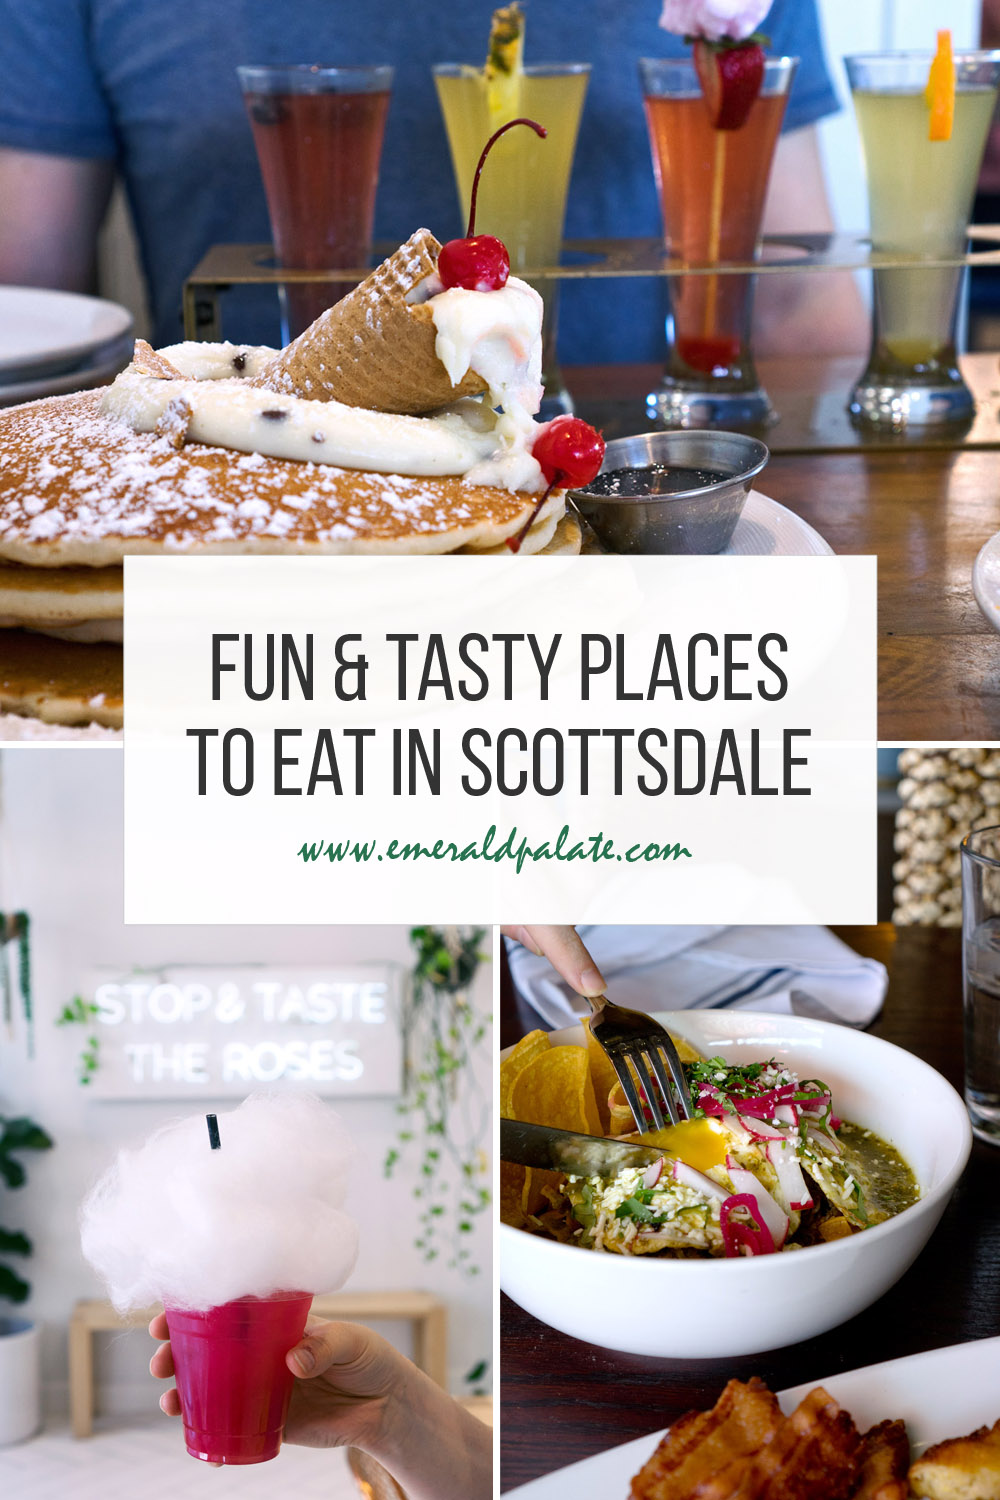 Scottsdale Arizona restaurants you must eat at. From restaurants in Old Town Scottsdale to the best places to eat in Scottsdale AZ, here is where to eat in Scottsdale AZ if you are looking for the best restaurants in Scottsdale for Mexican, brunch, cocktails, and more! Some of these spots have really instagrammable dishes and decor, so they are also some of the most unique things to do in Scottsdale if you are looking for unique Scottsdale restaurants!